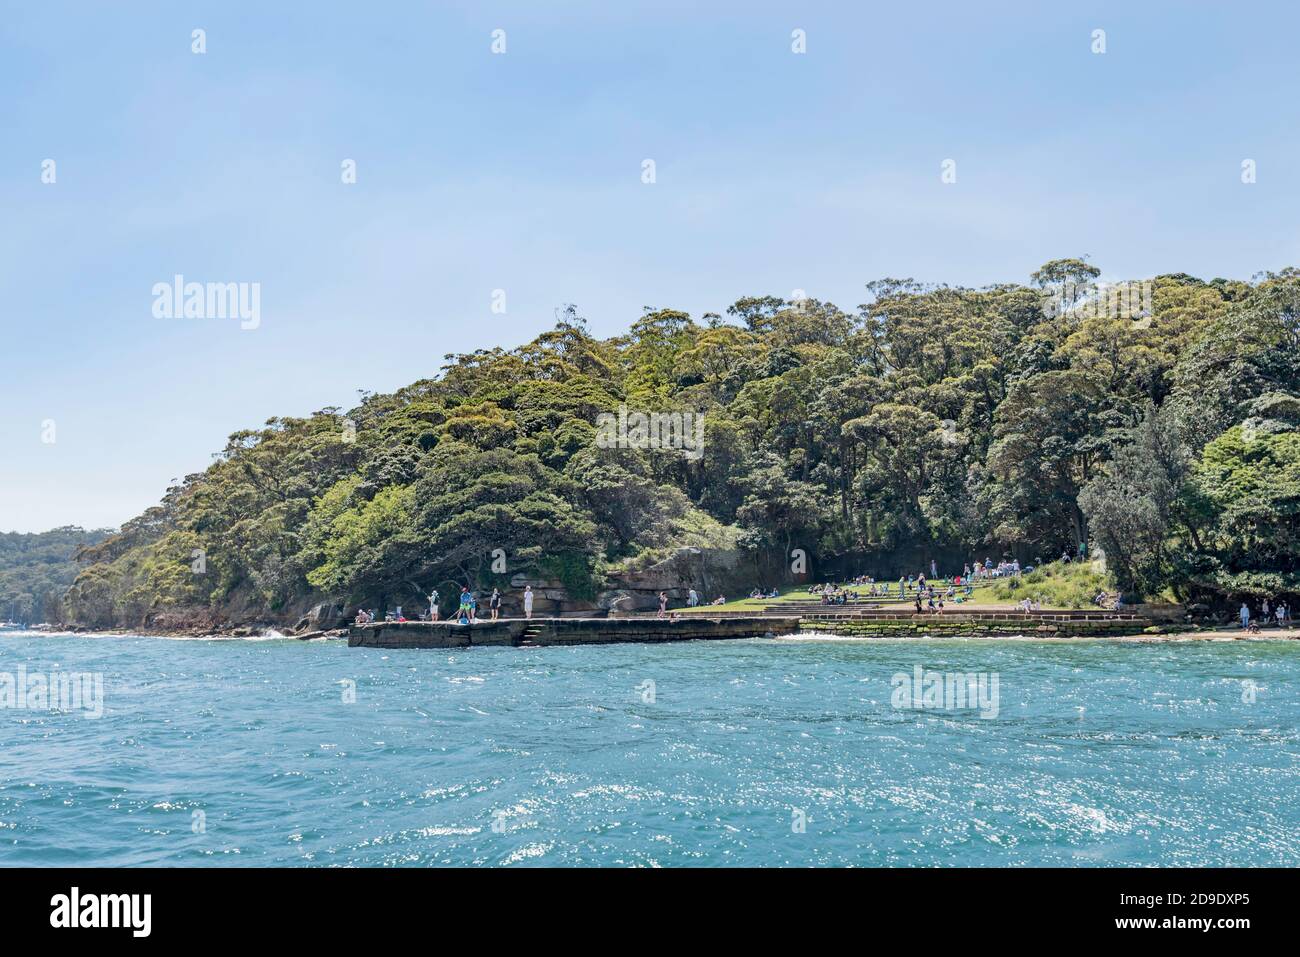 Bradley's Head, named after the First Fleet naval officer William Bradley is a popular fishing and picnicking spot in Sydney Harbour, Australia Stock Photo